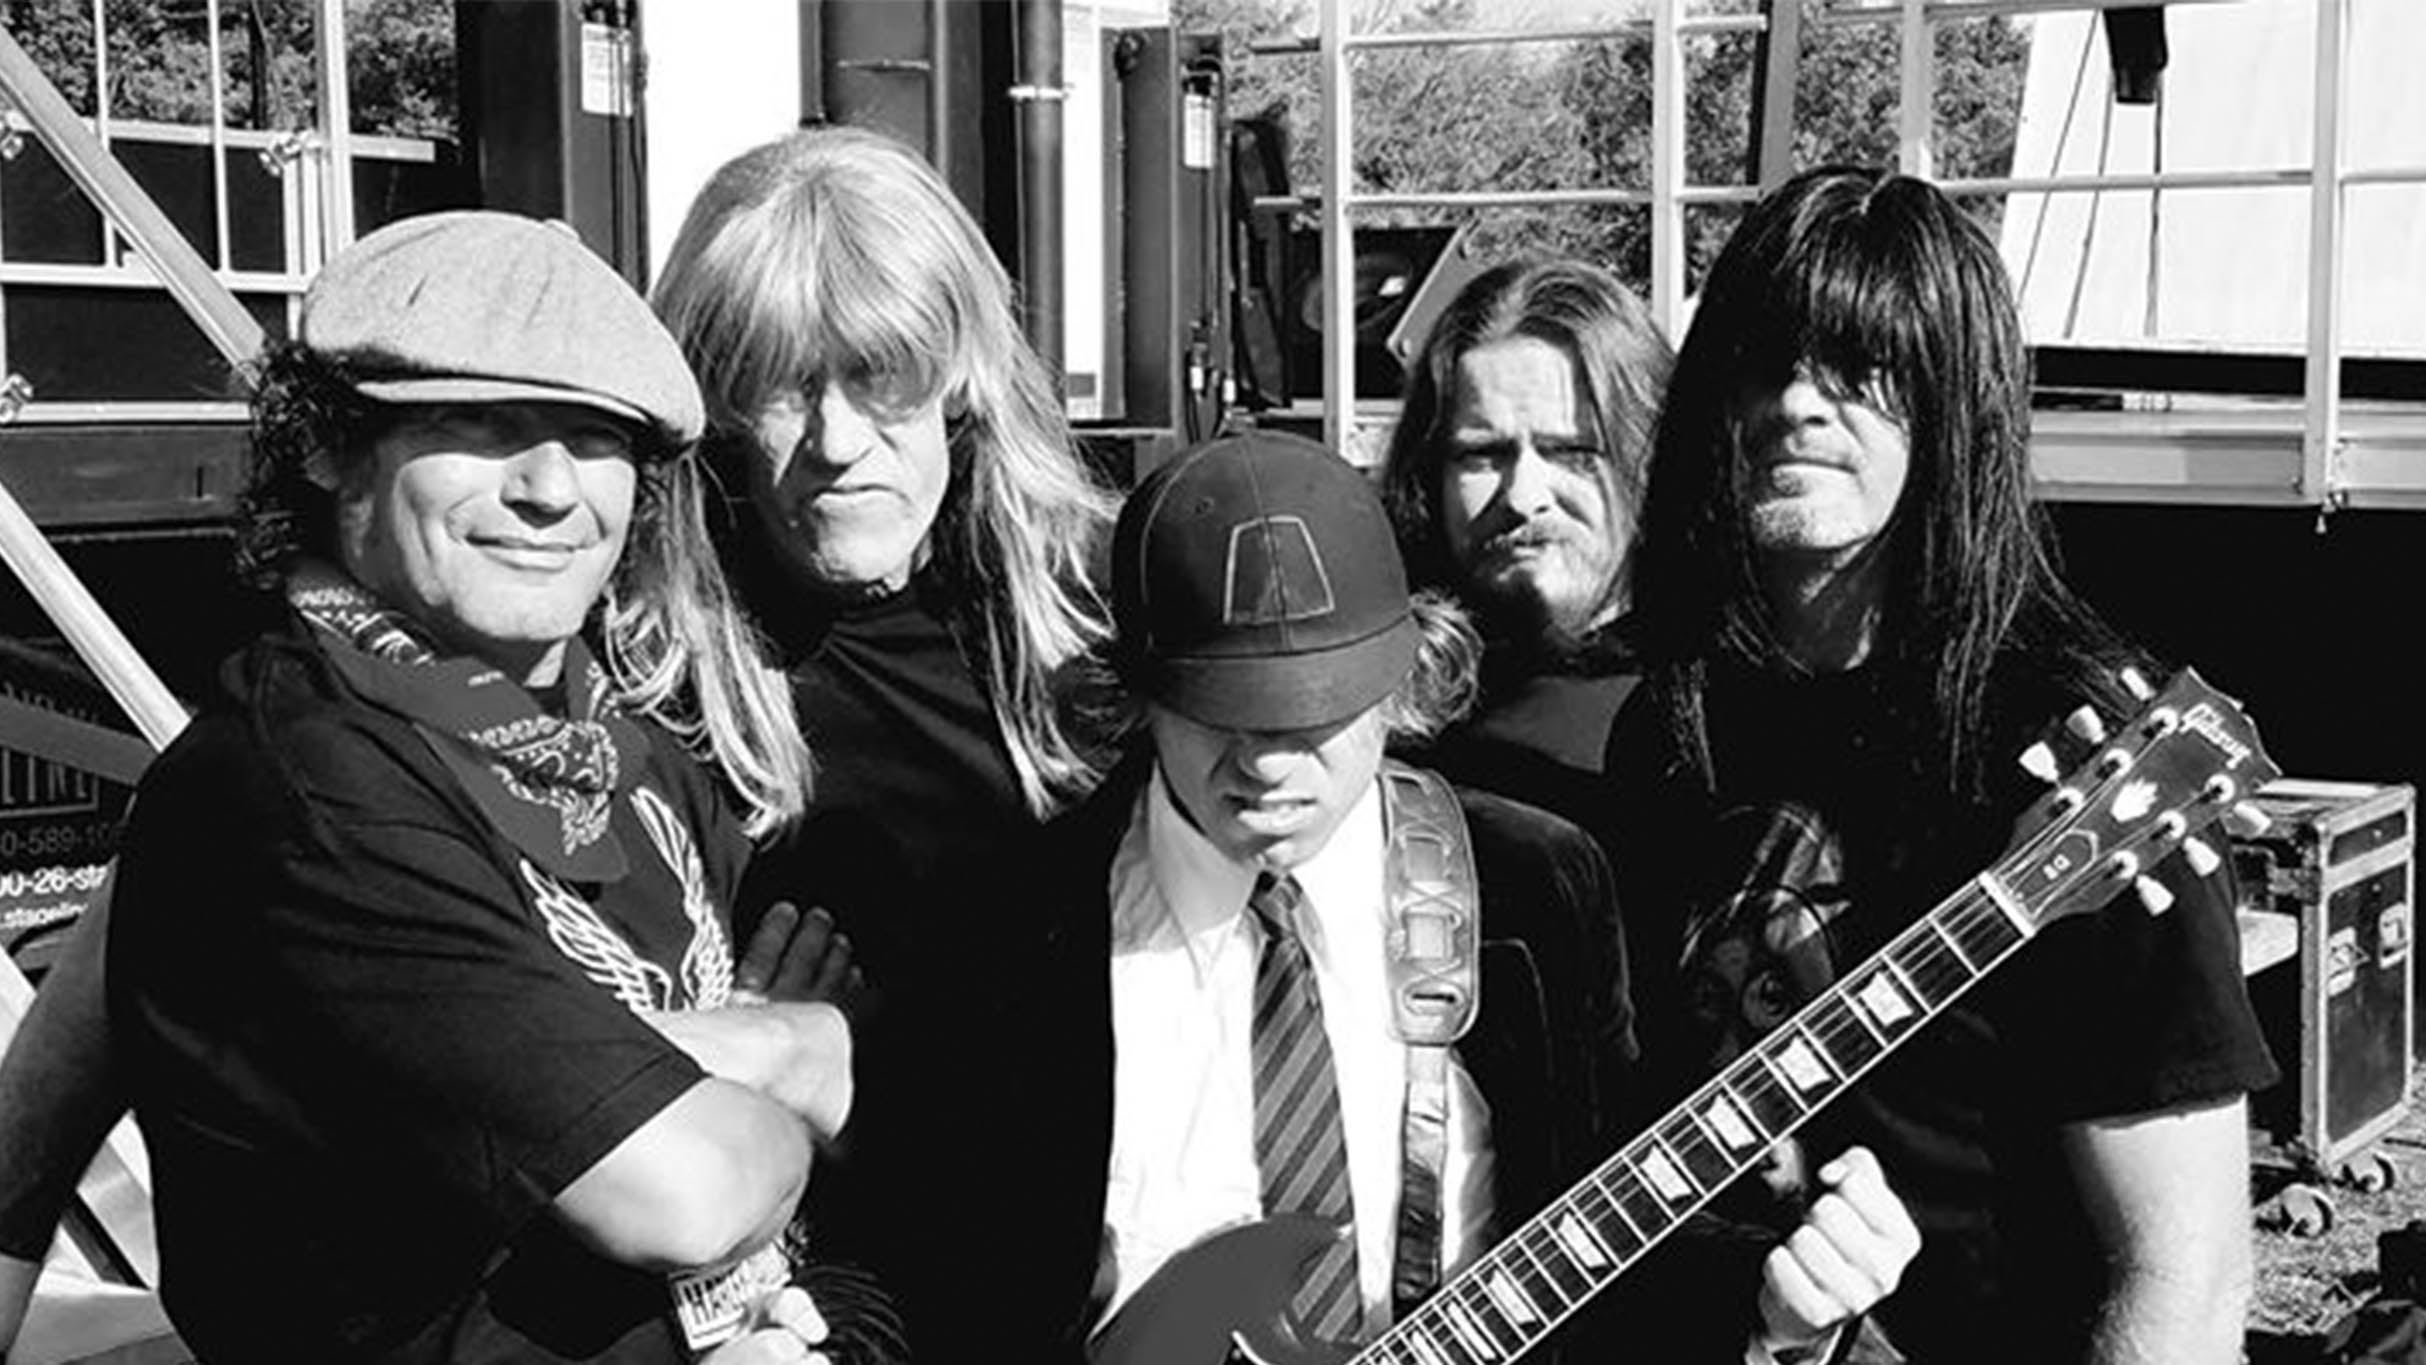 Noise Pollution - AC/DC Experience in Las Vegas promo photo for Artist presale offer code